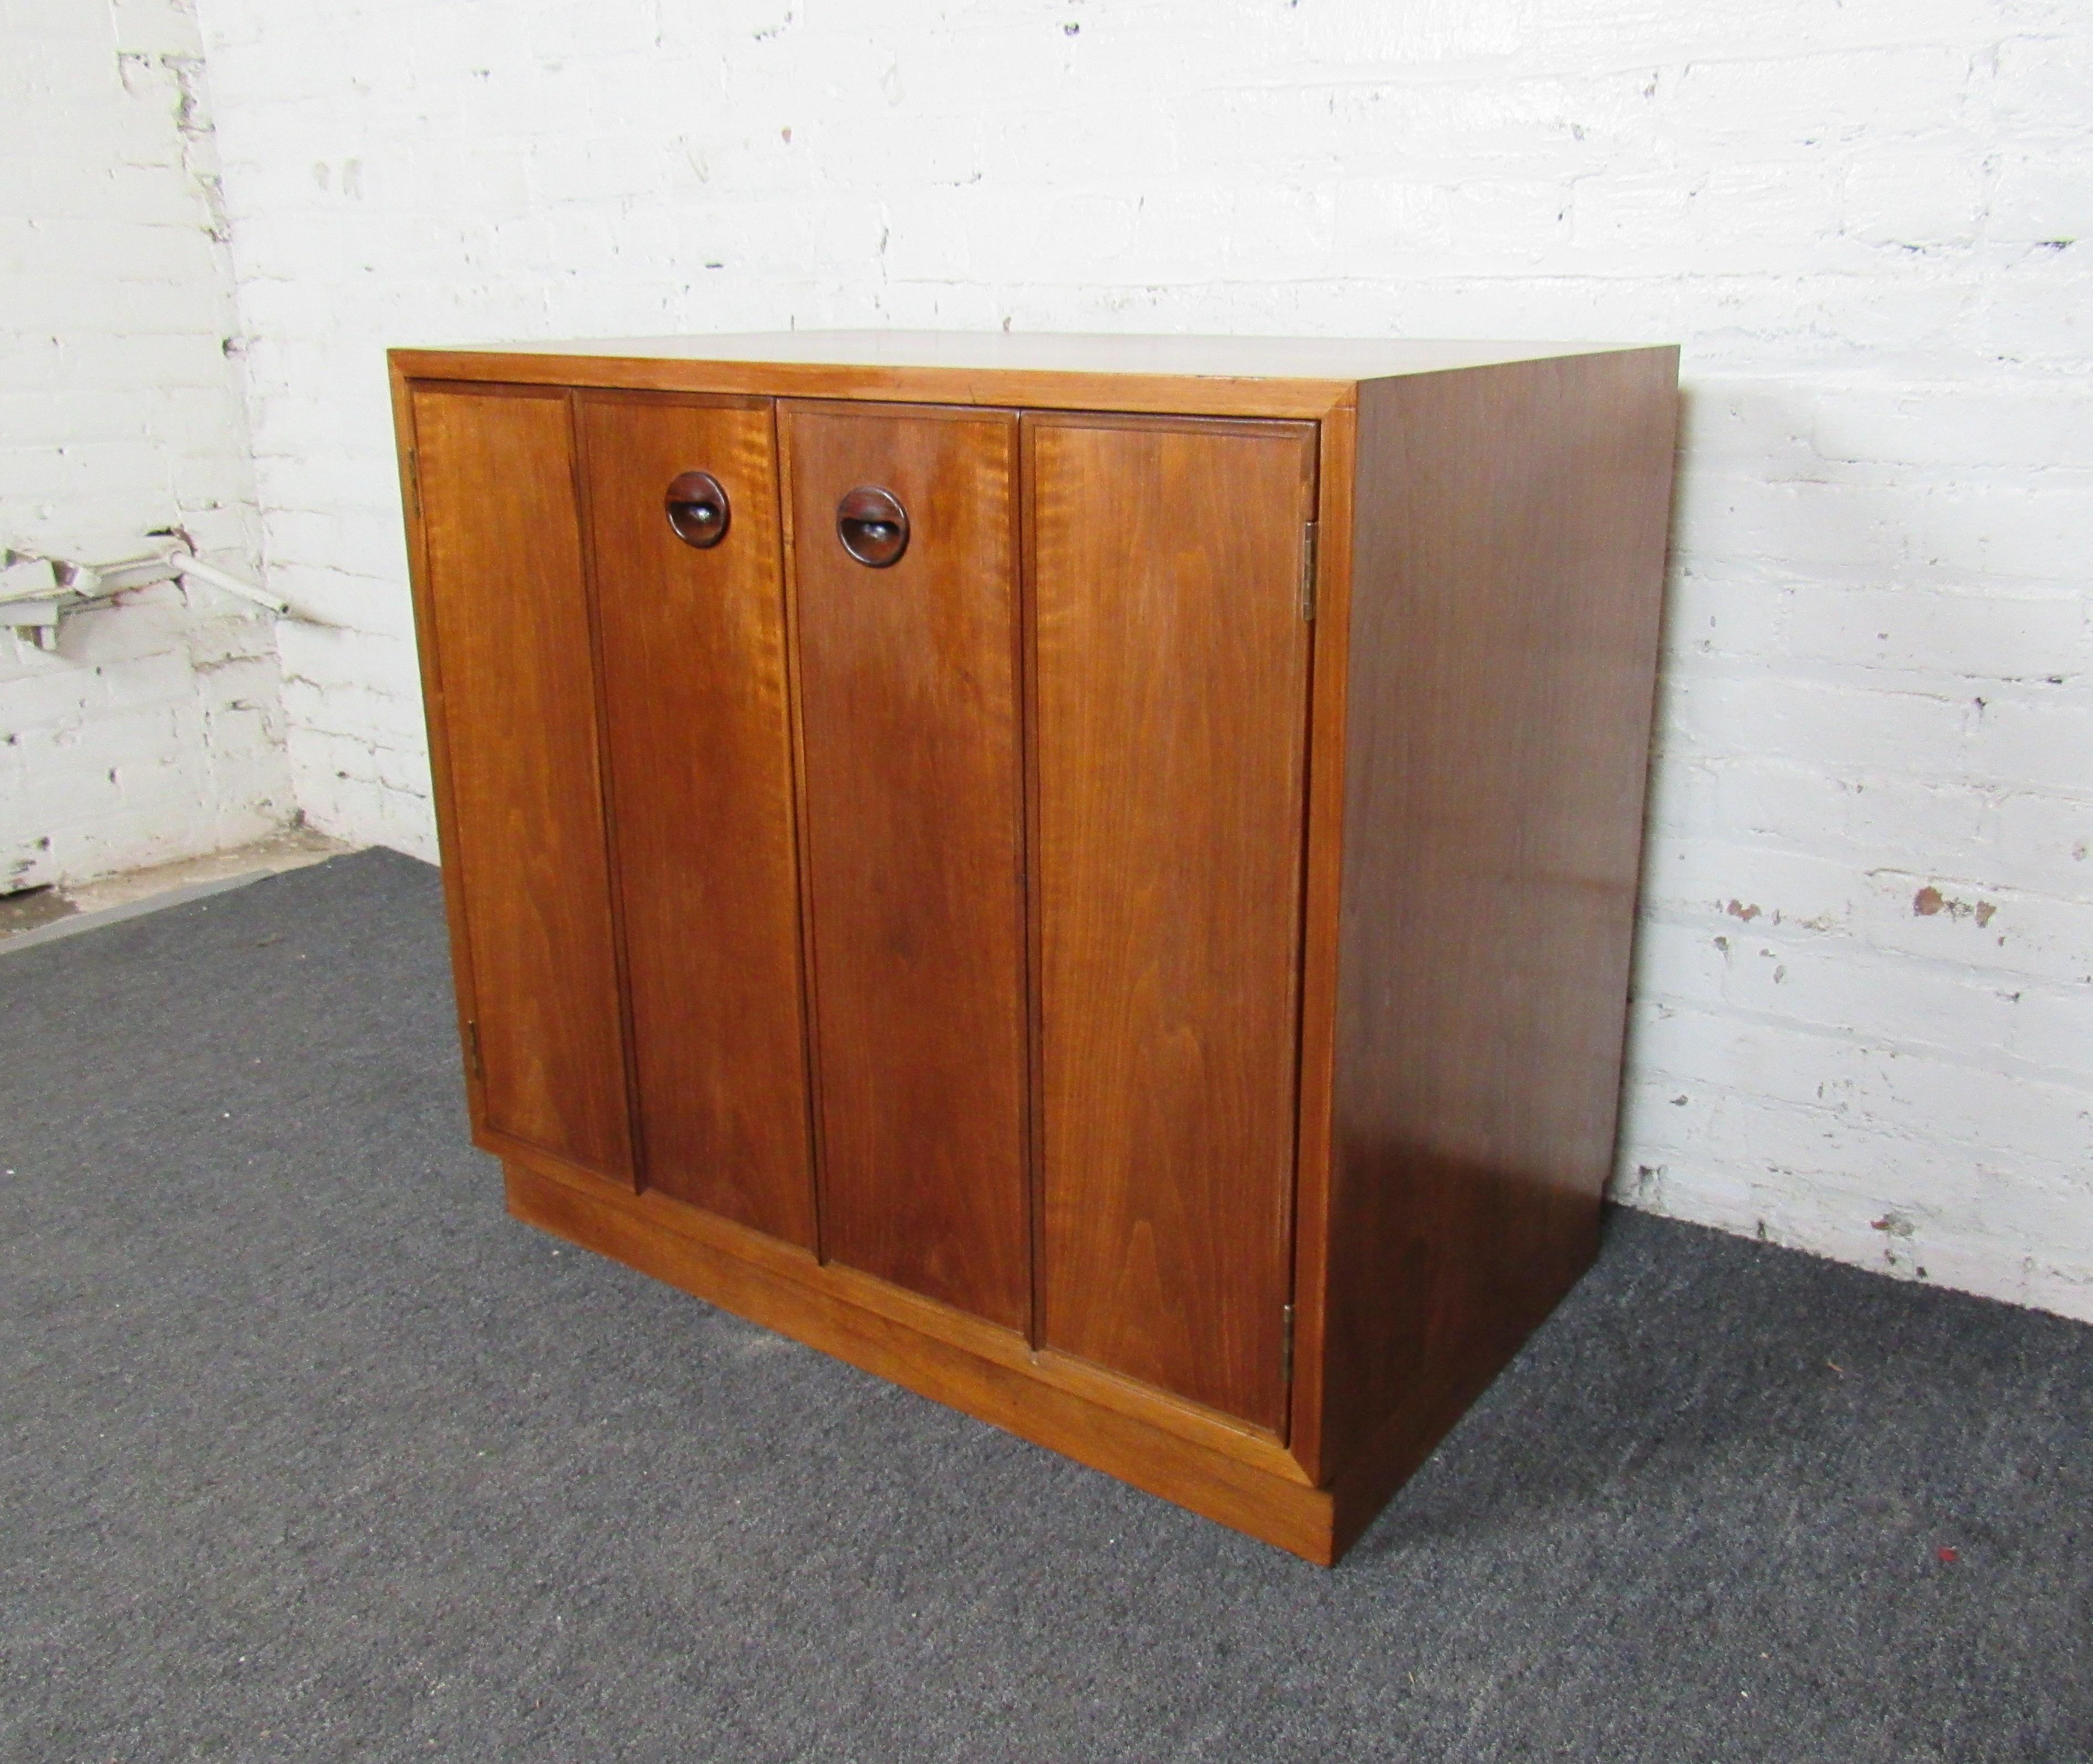 A compact and interesting Mid-Century Modern cabinet with sculpted wooden handles, this piece is a great and lasting addition to any home or office. Please confirm item location with seller (NY/NJ).